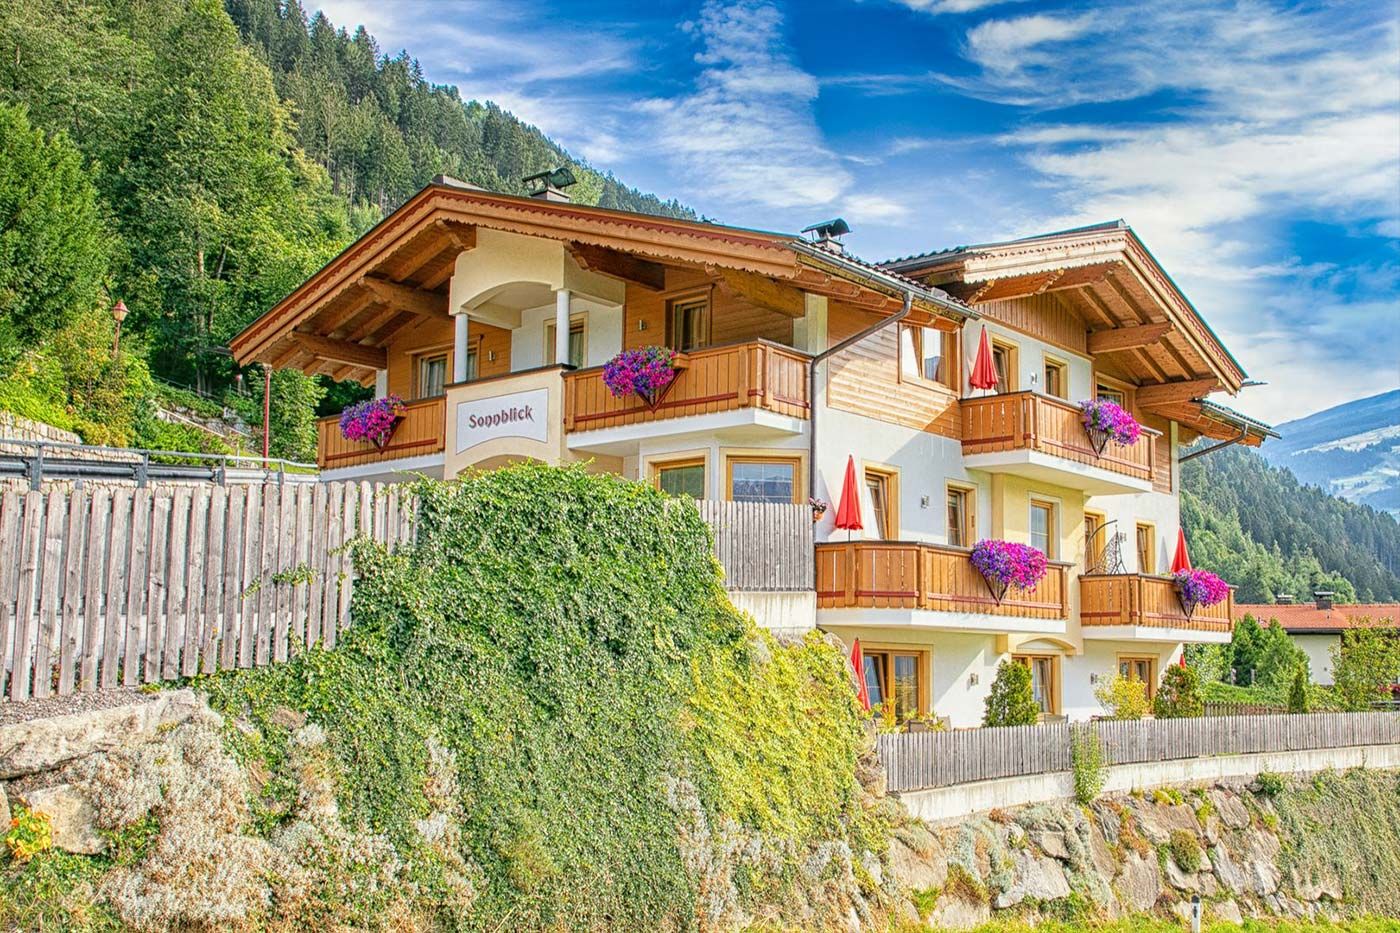 Welcome to the Landhaus Sonnblick in Zell in the Ziller! We would like to make your holiday in the Zillertal as nice as possible.